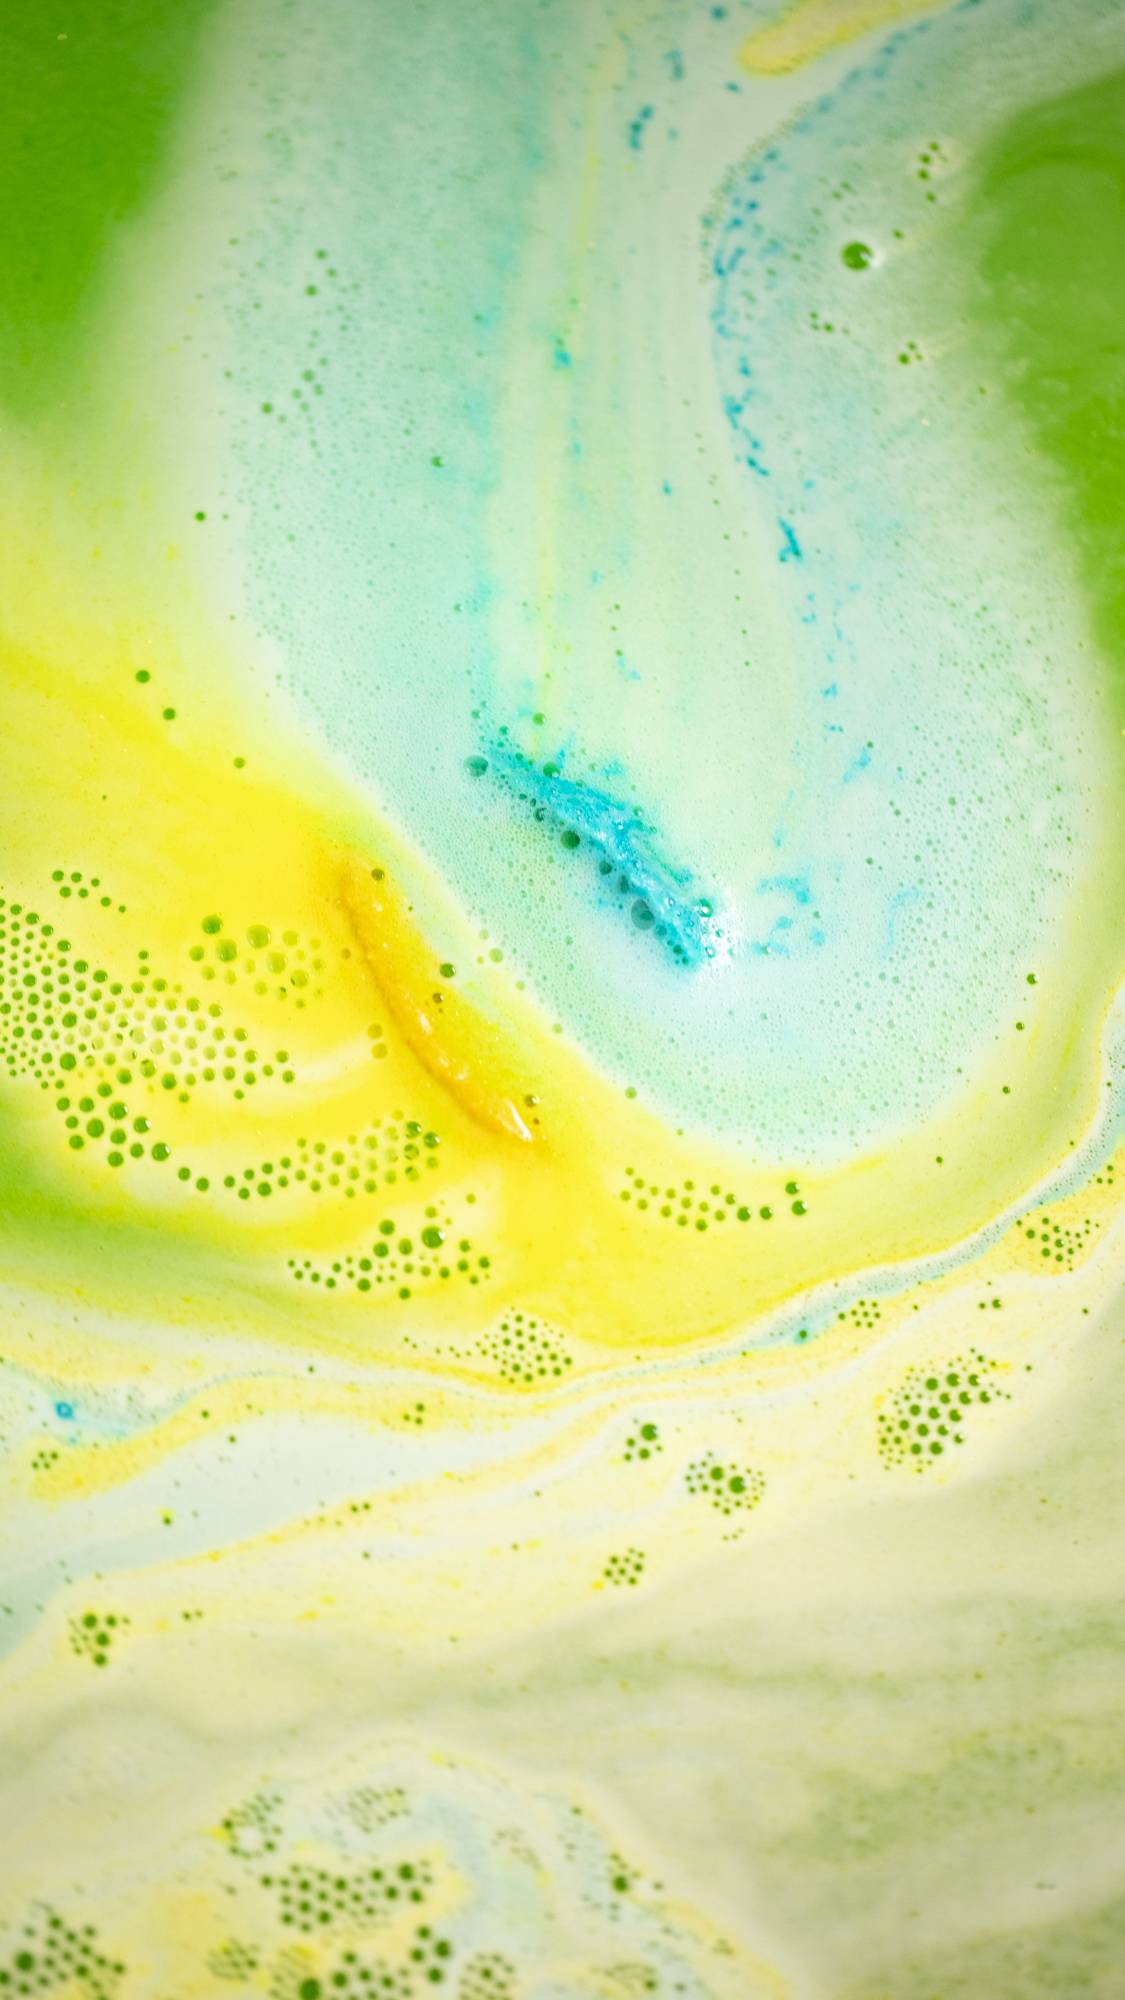 The Golden Egg bath bomb has fully dissolved leaving a thick ocean of yellow, green and blue vivid swirls. 